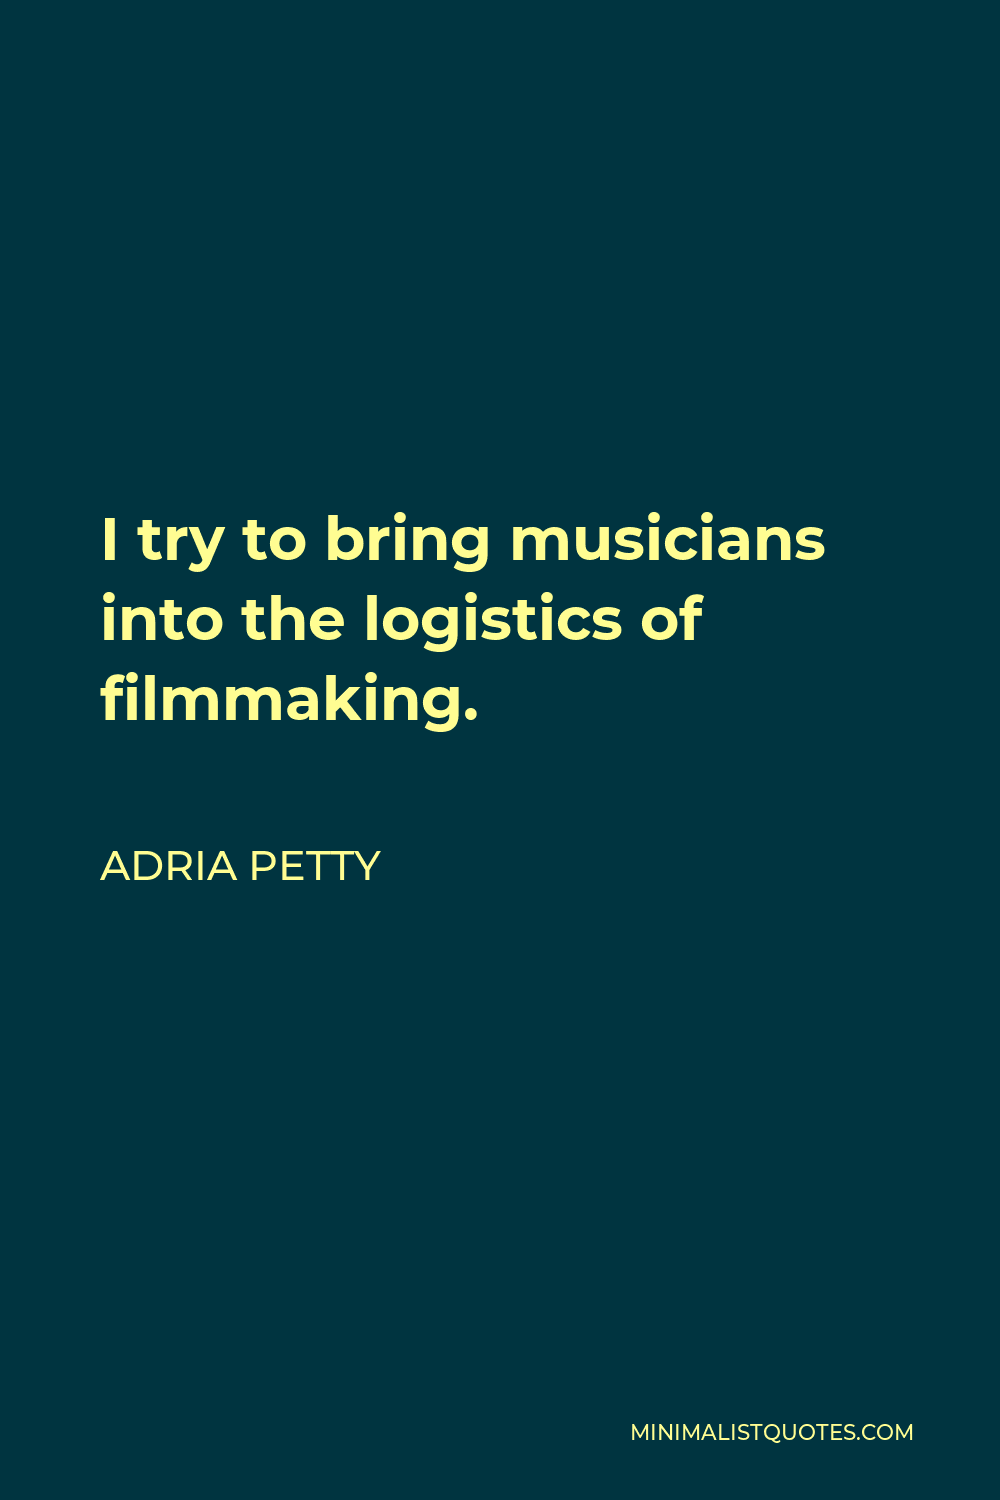 Adria Petty Quote - I try to bring musicians into the logistics of filmmaking.